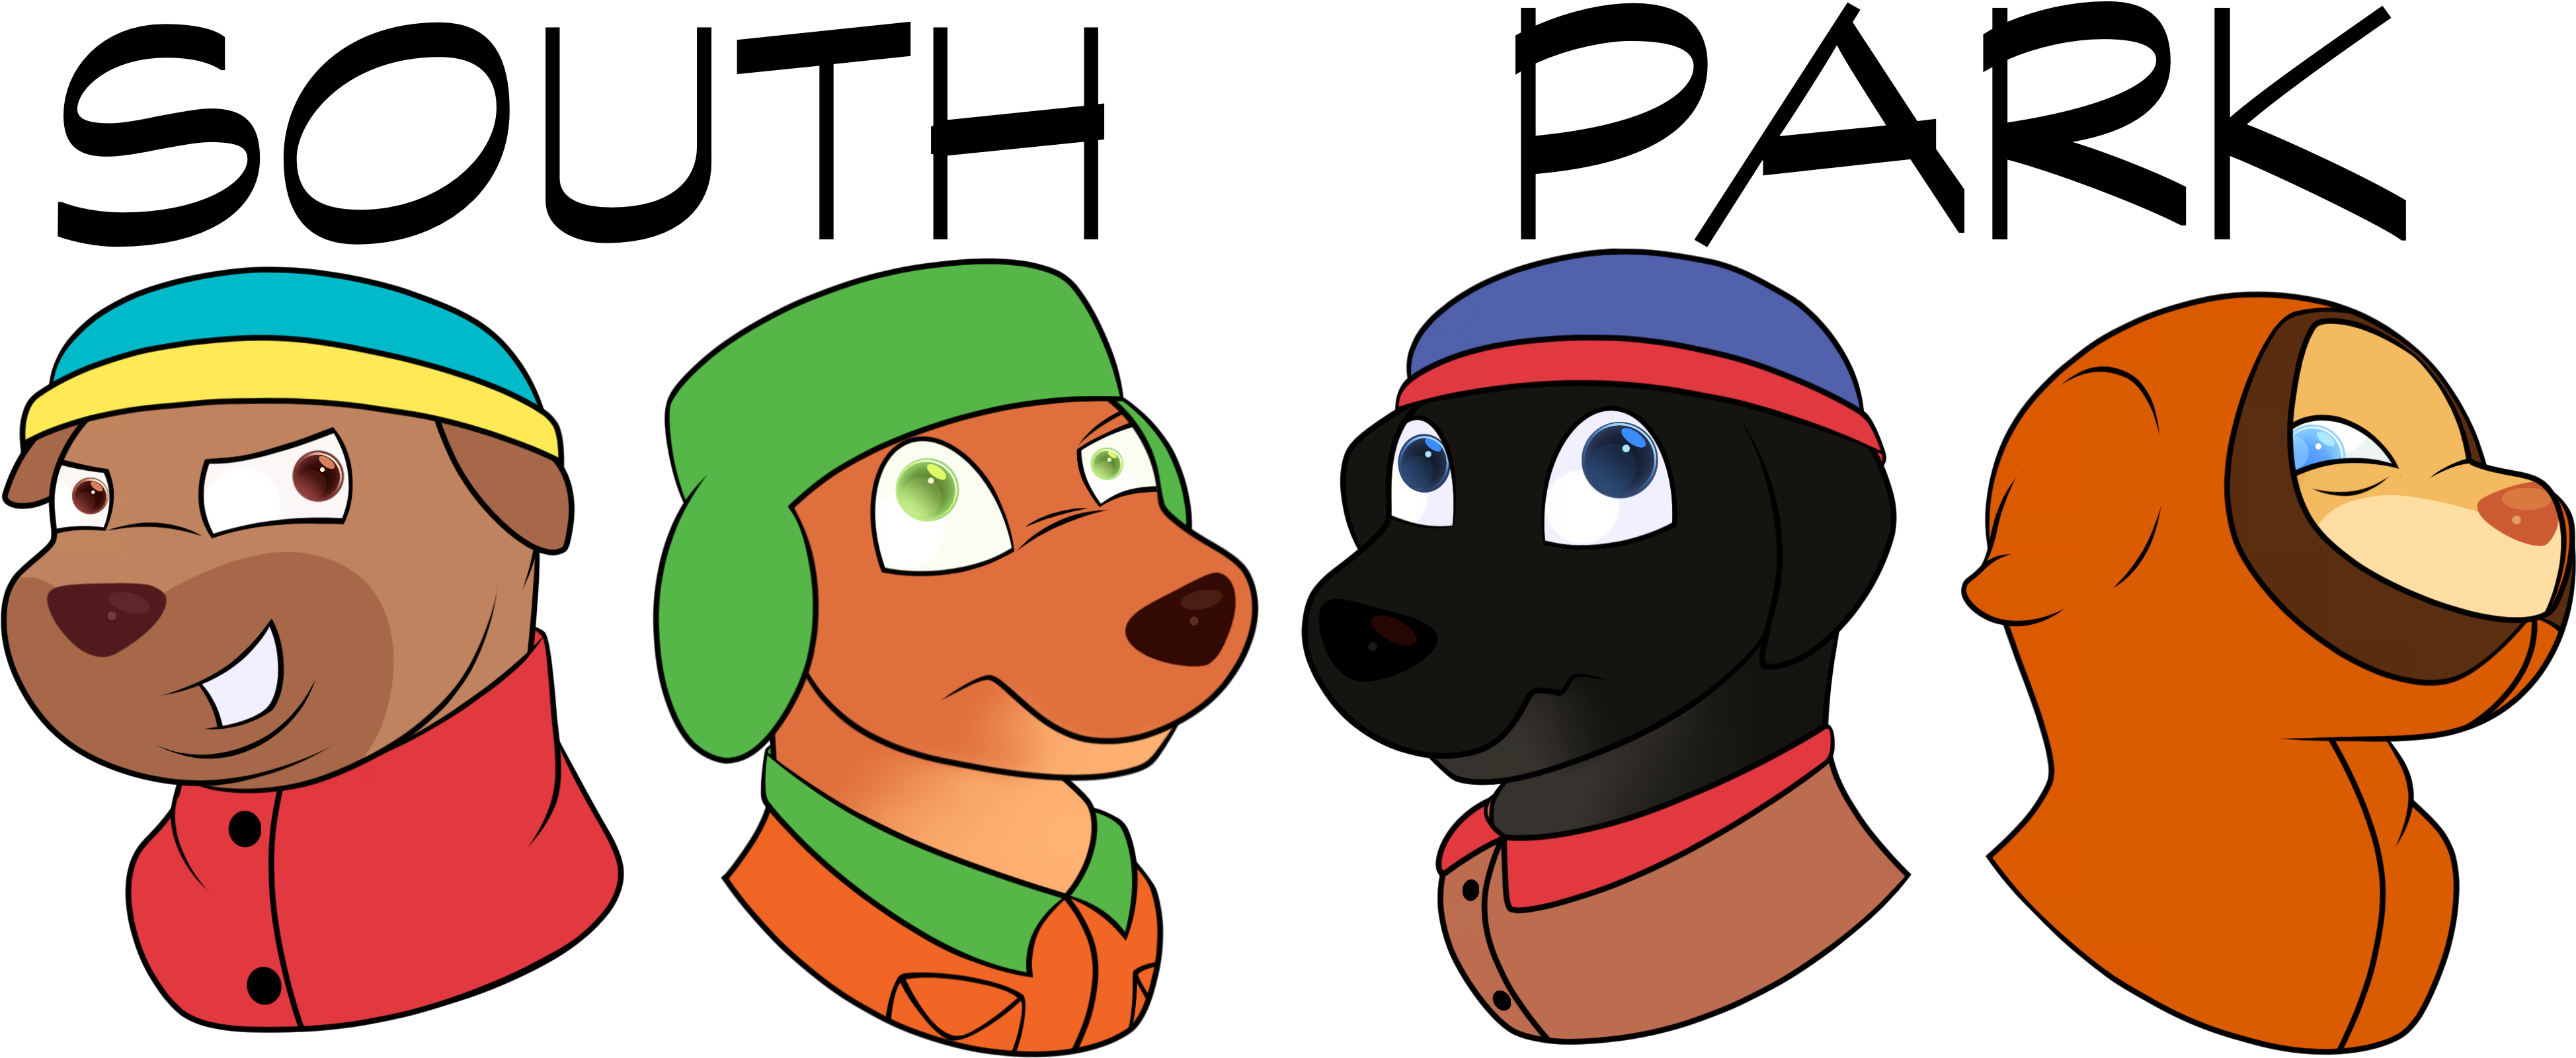 South Park Dogs - South Park Characters Are Dogs (4000x1695)